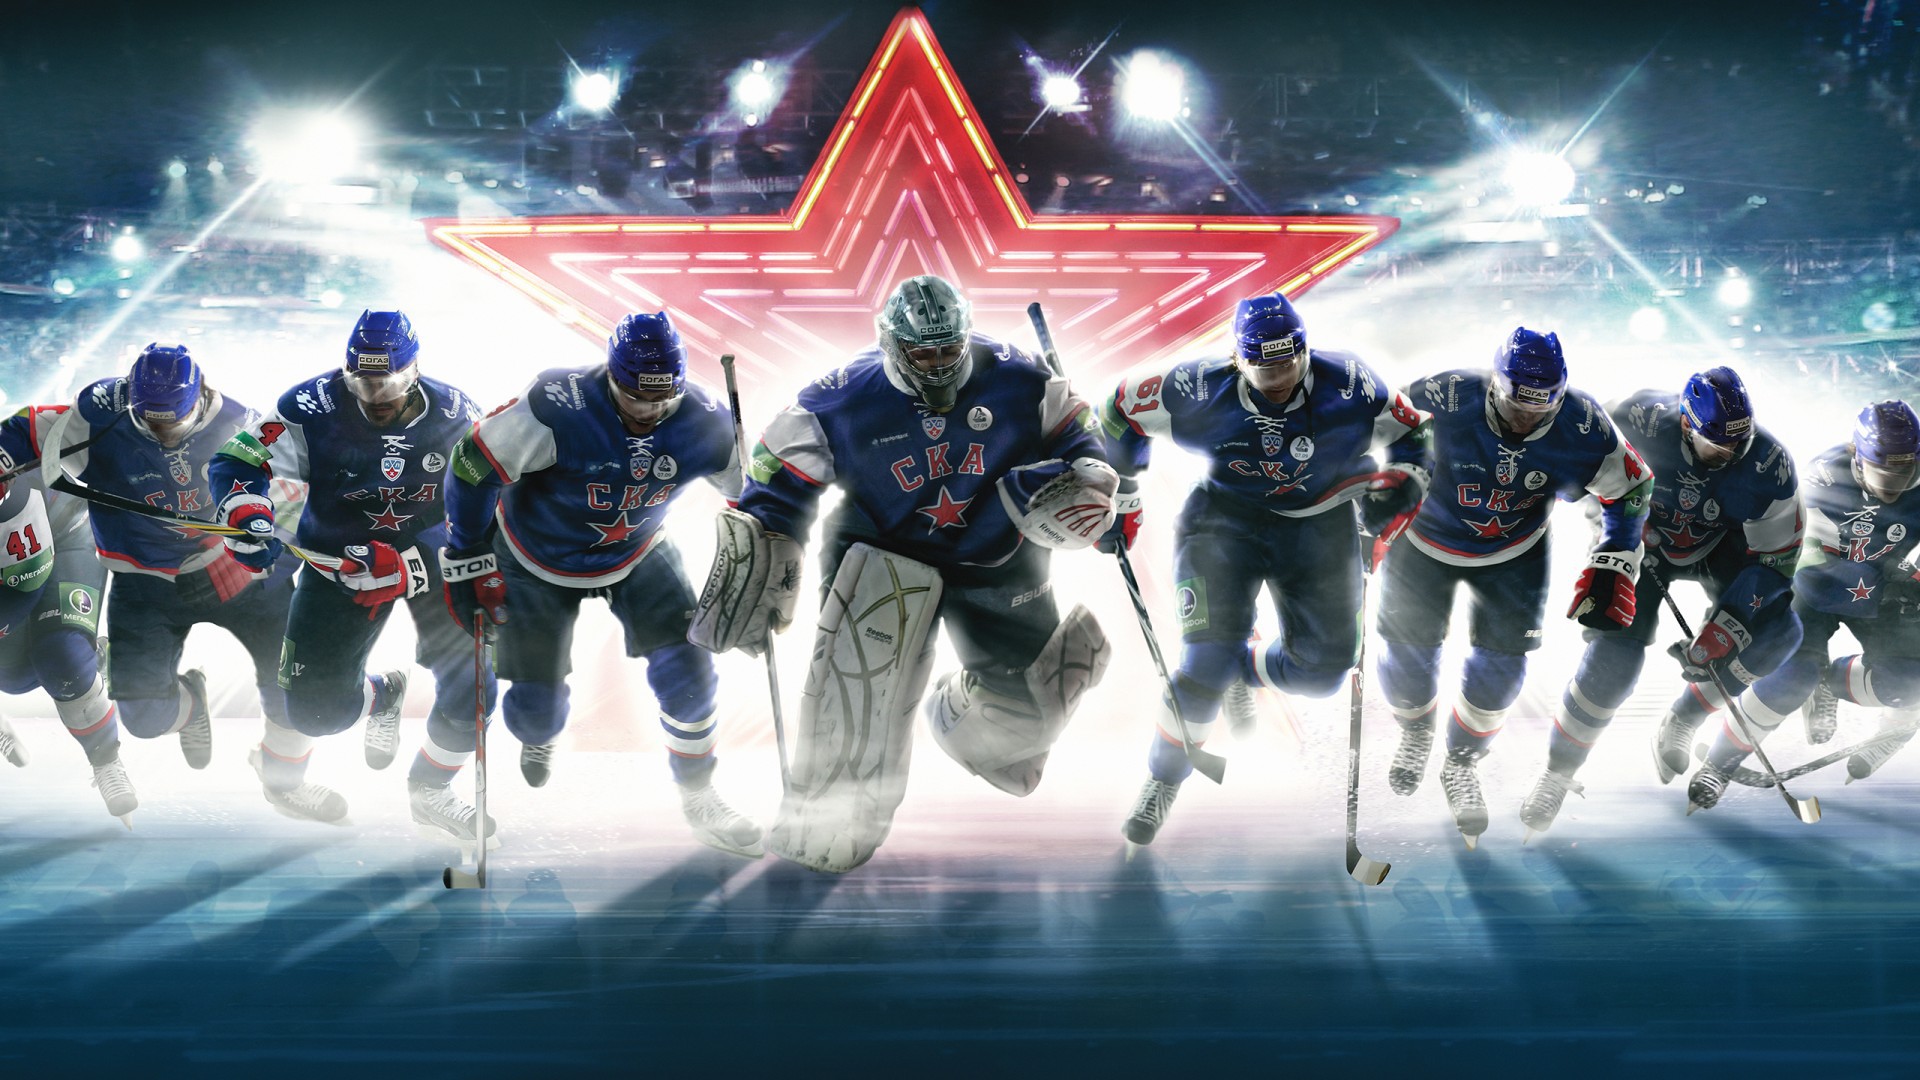 Hockey team wallpapers and images - wallpapers, pictures, photos